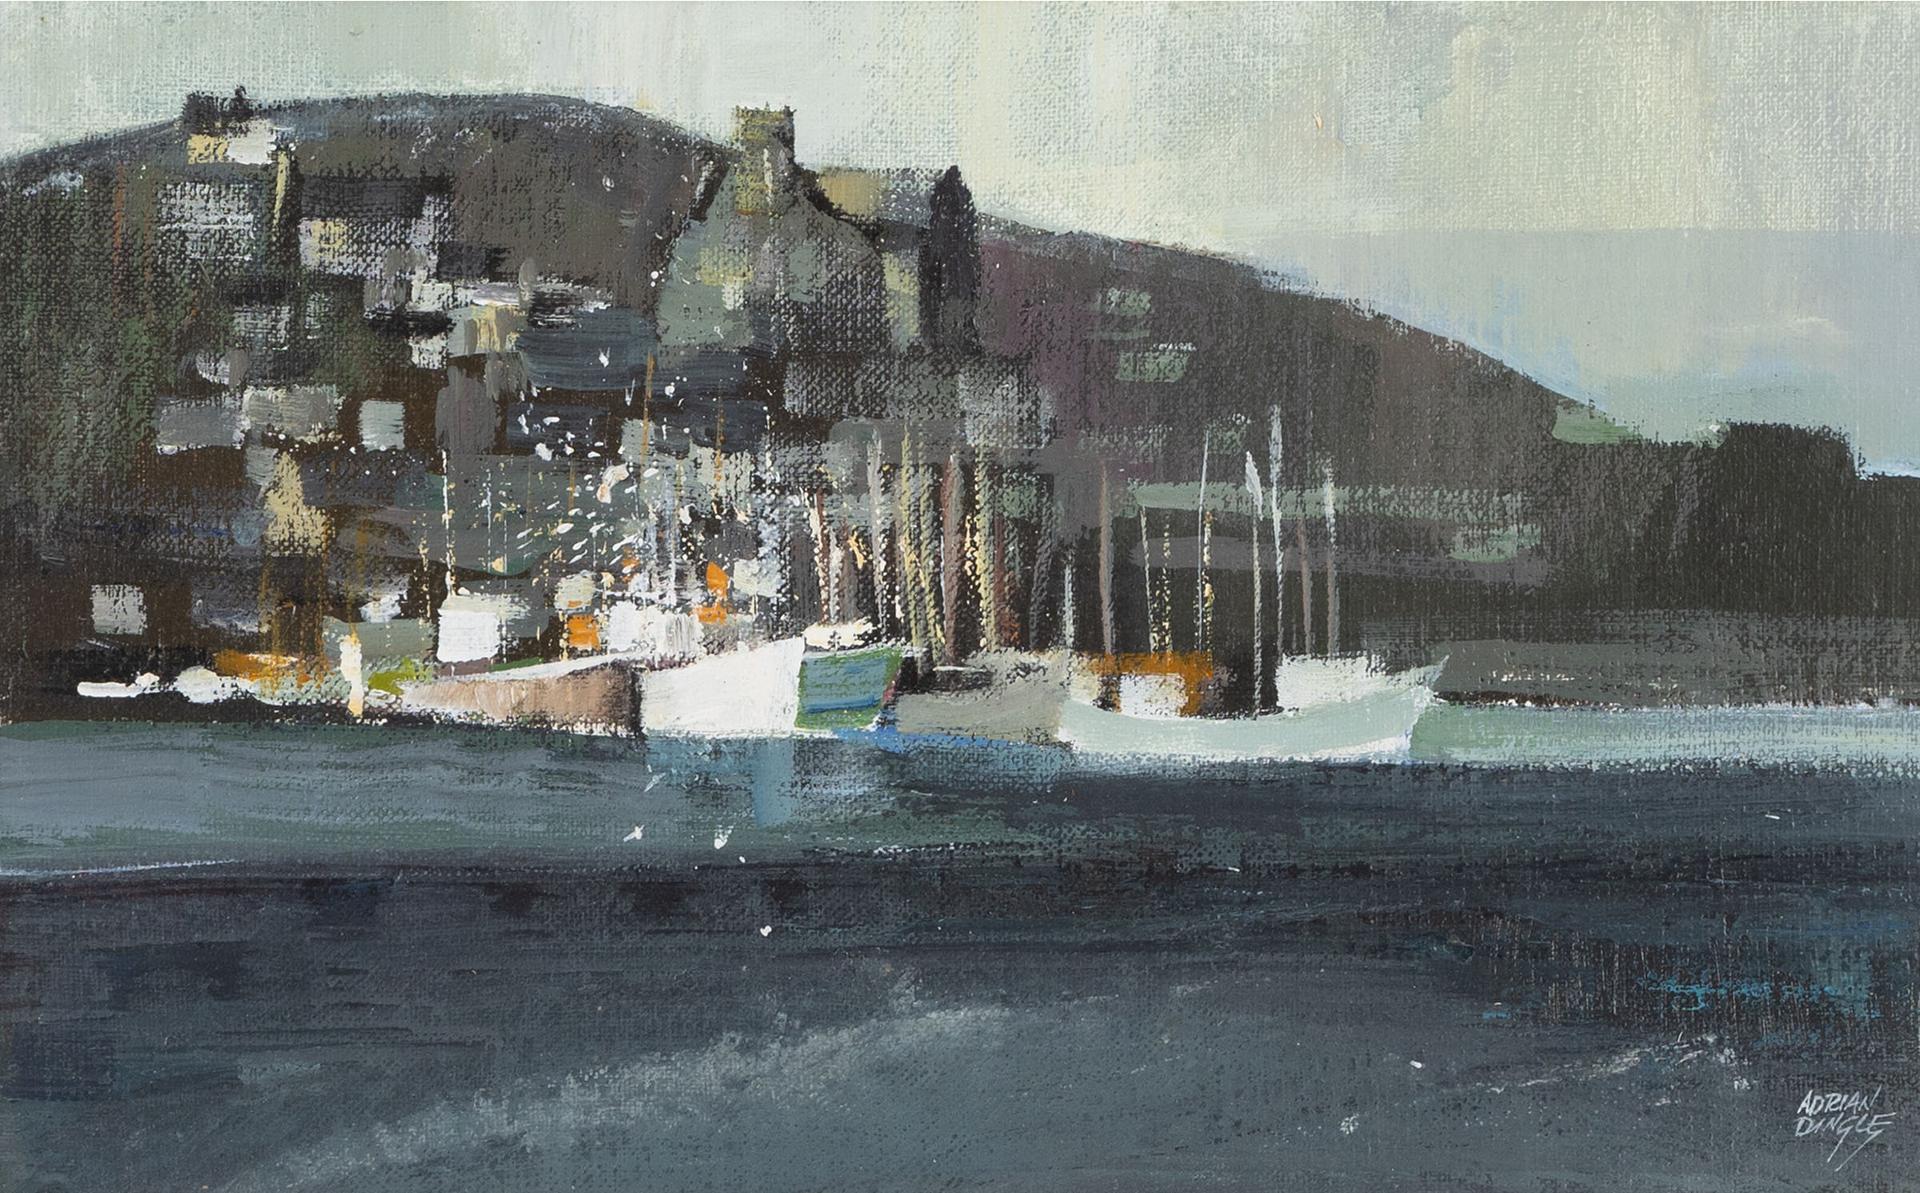 John Adrian Darley Dingle (1911-1974) - Donegal Trawlers, Killybegs, County Donegal, Eire